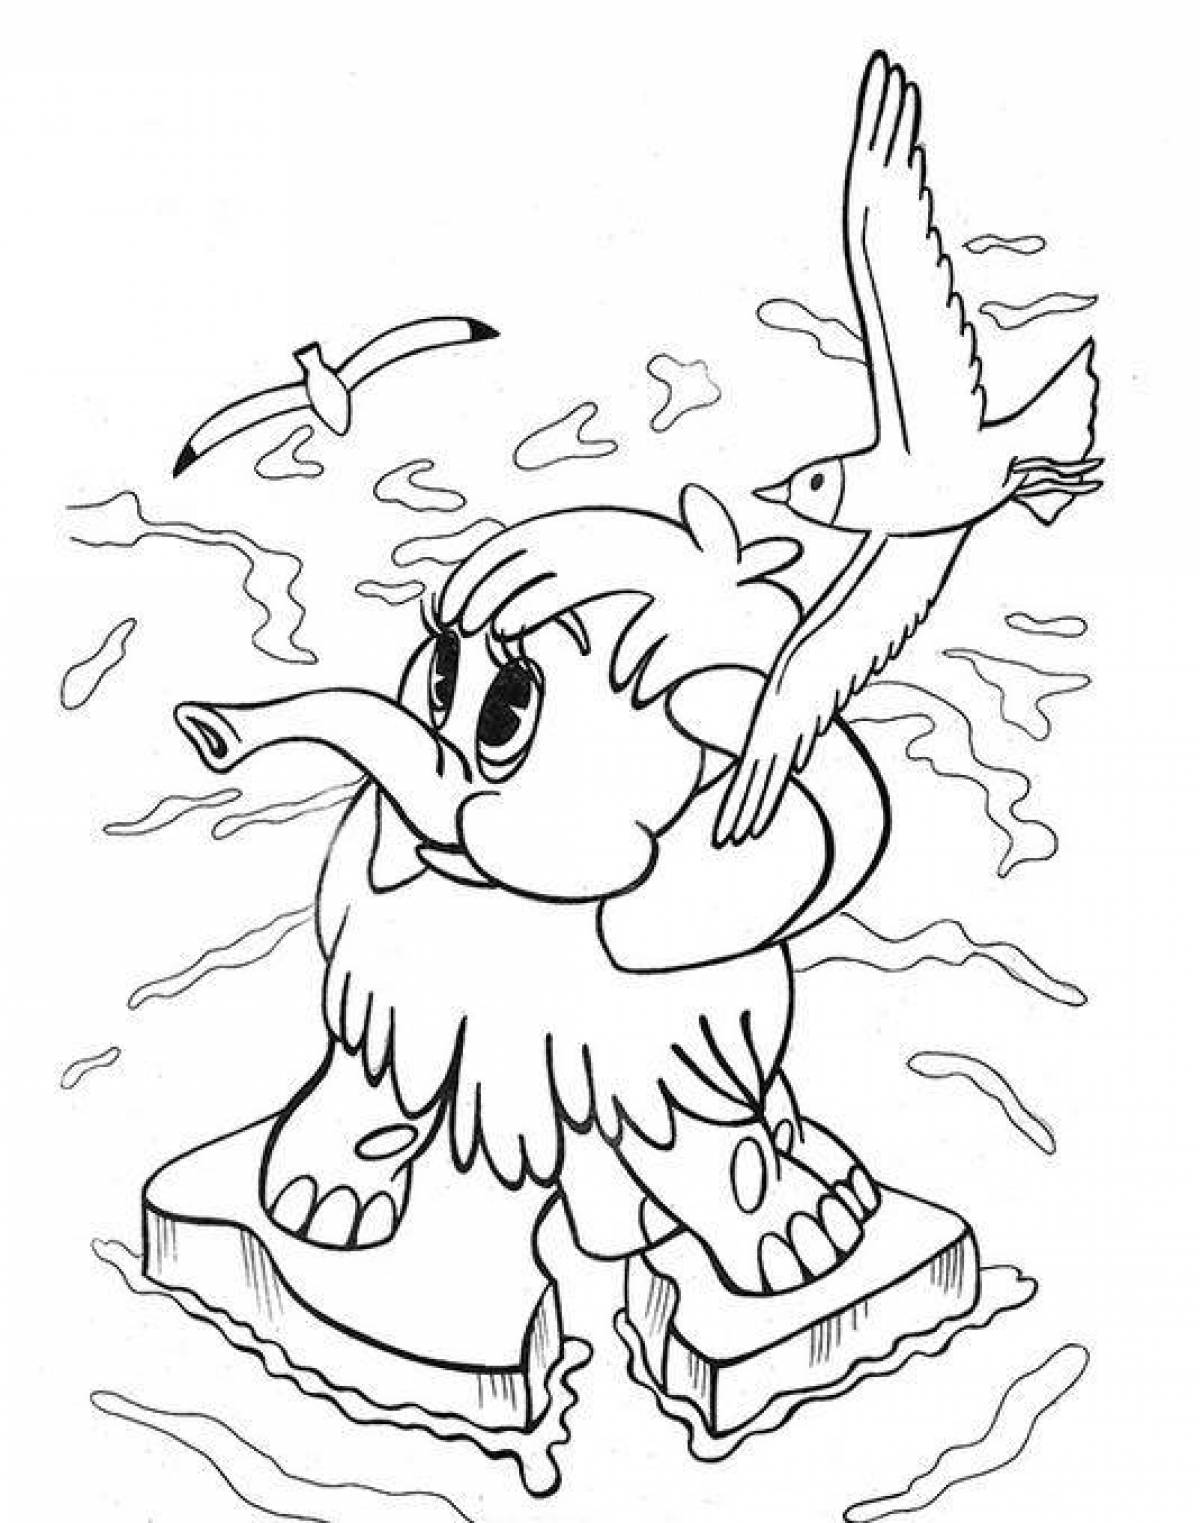 Glorious mammoth coloring page